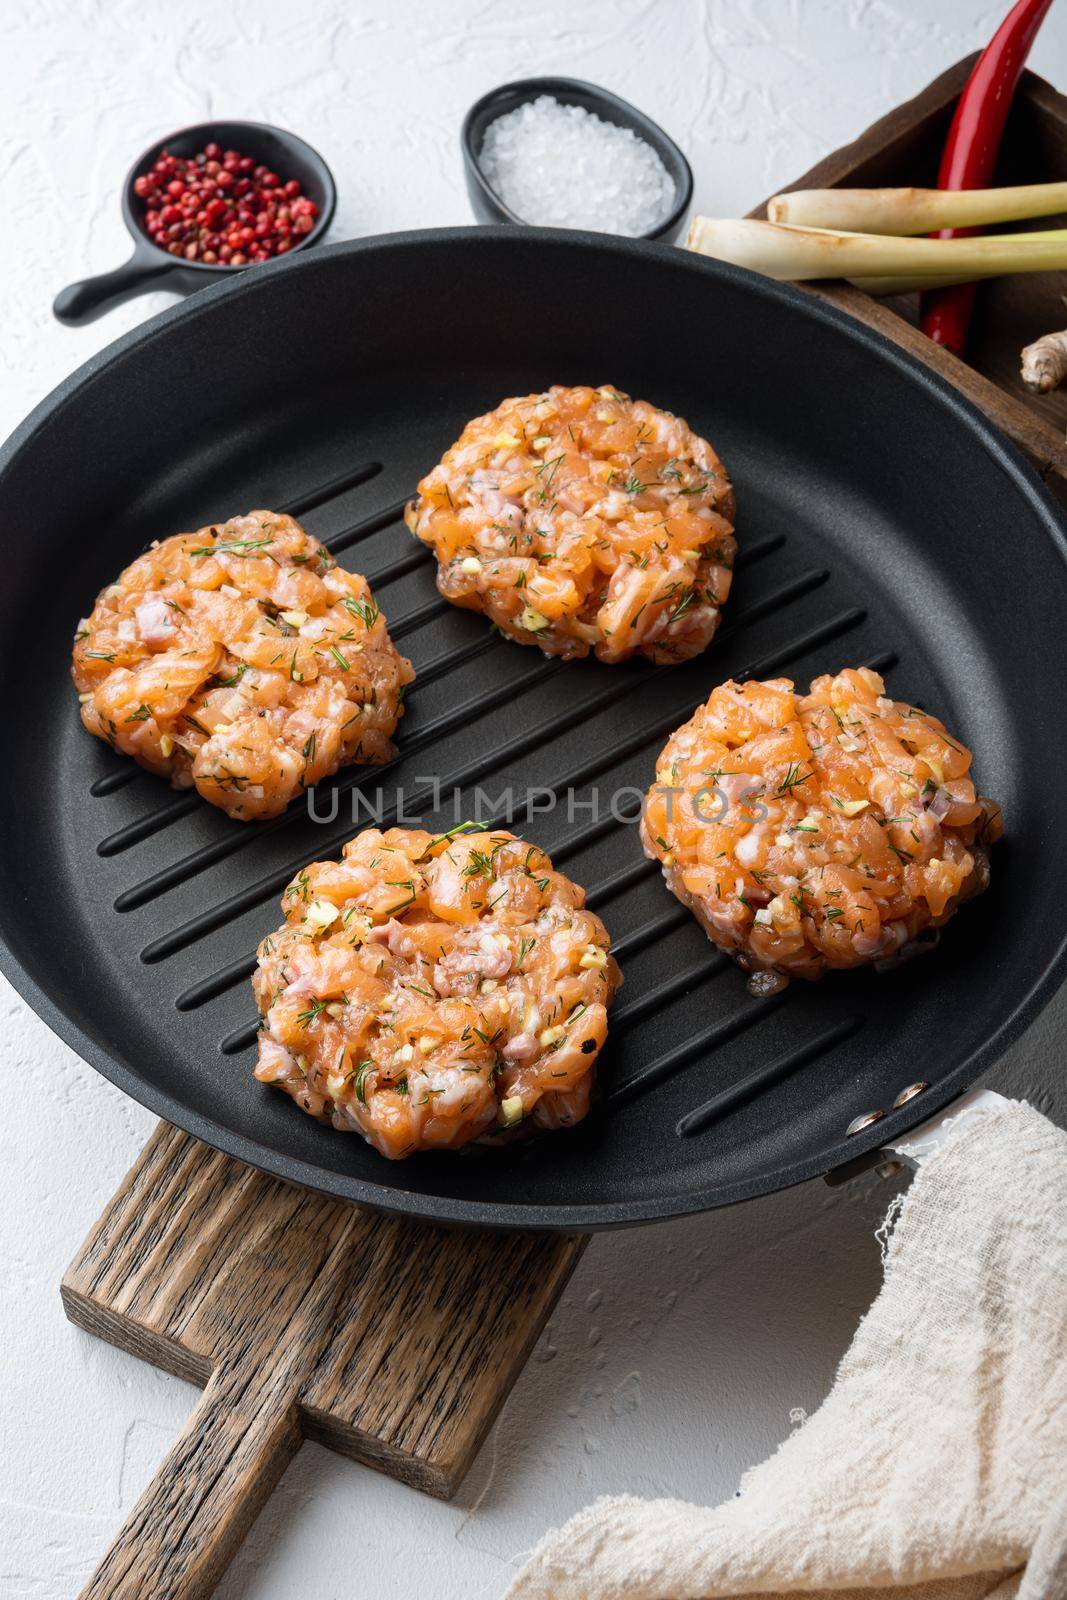 Raw fish patties with salmon fillet and lemongrass, on white textured background